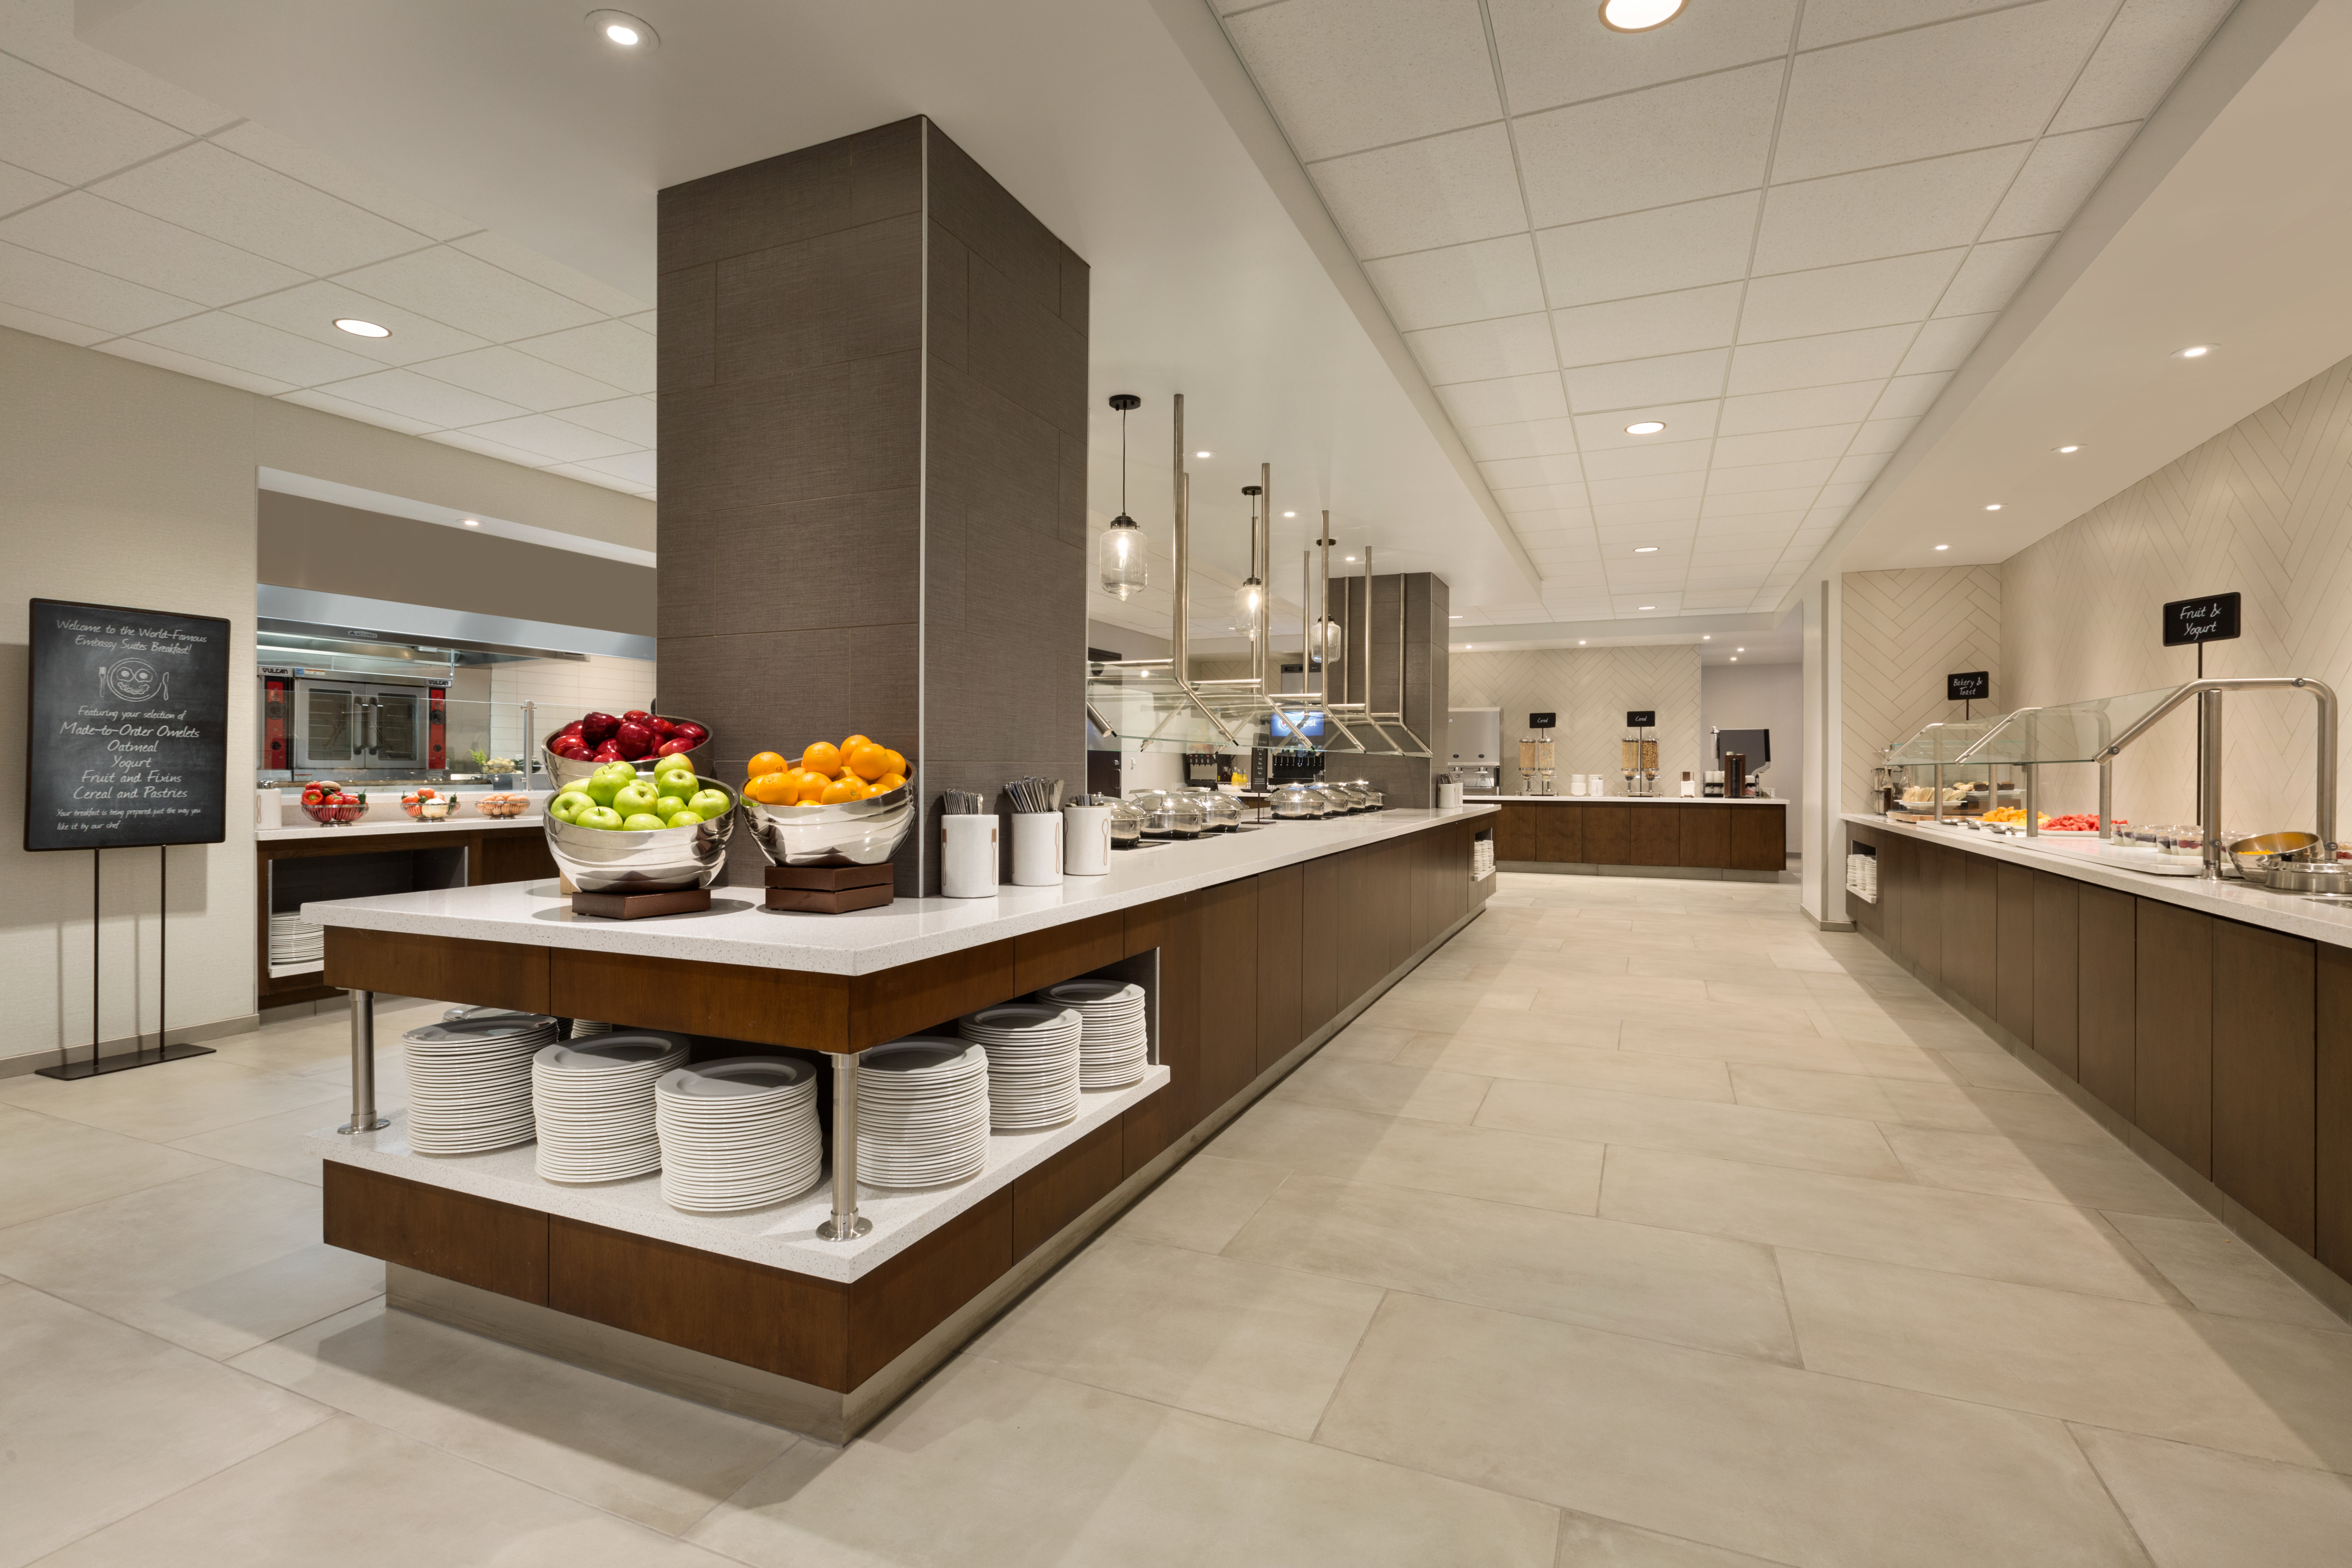 Breakfast Bar Area with Fresh Fruits